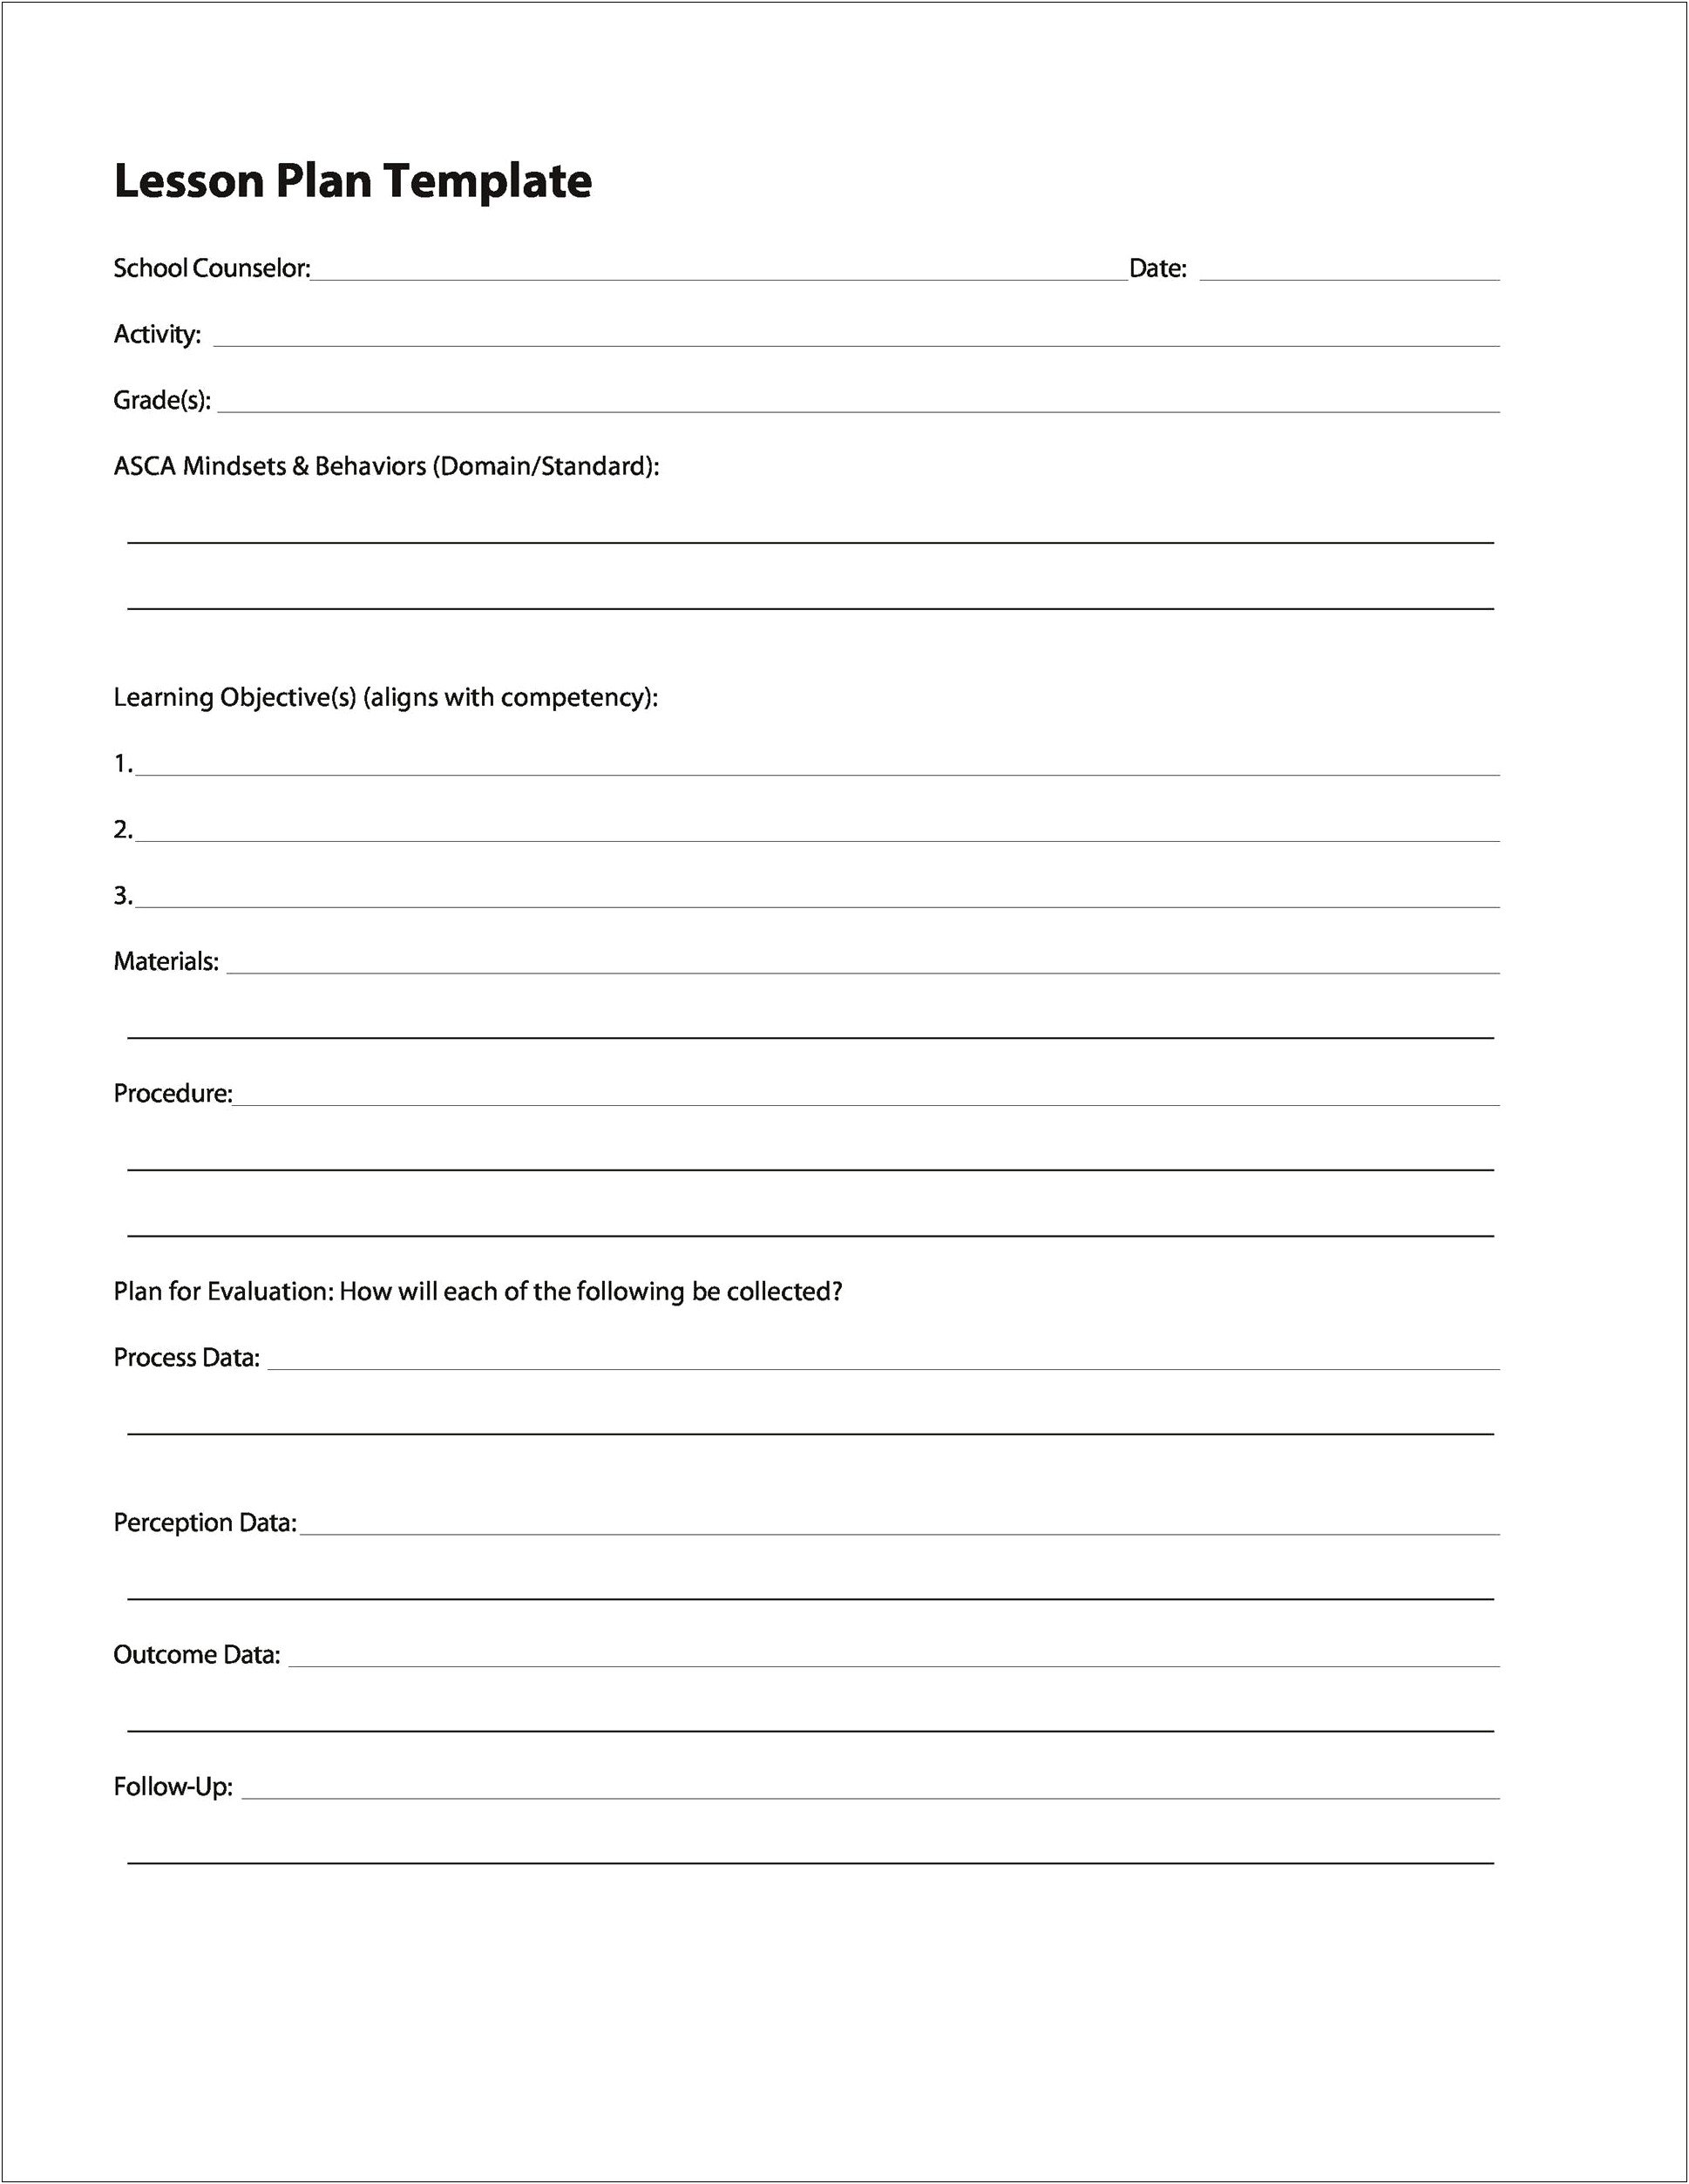 Lesson Plan Template Free Word Download